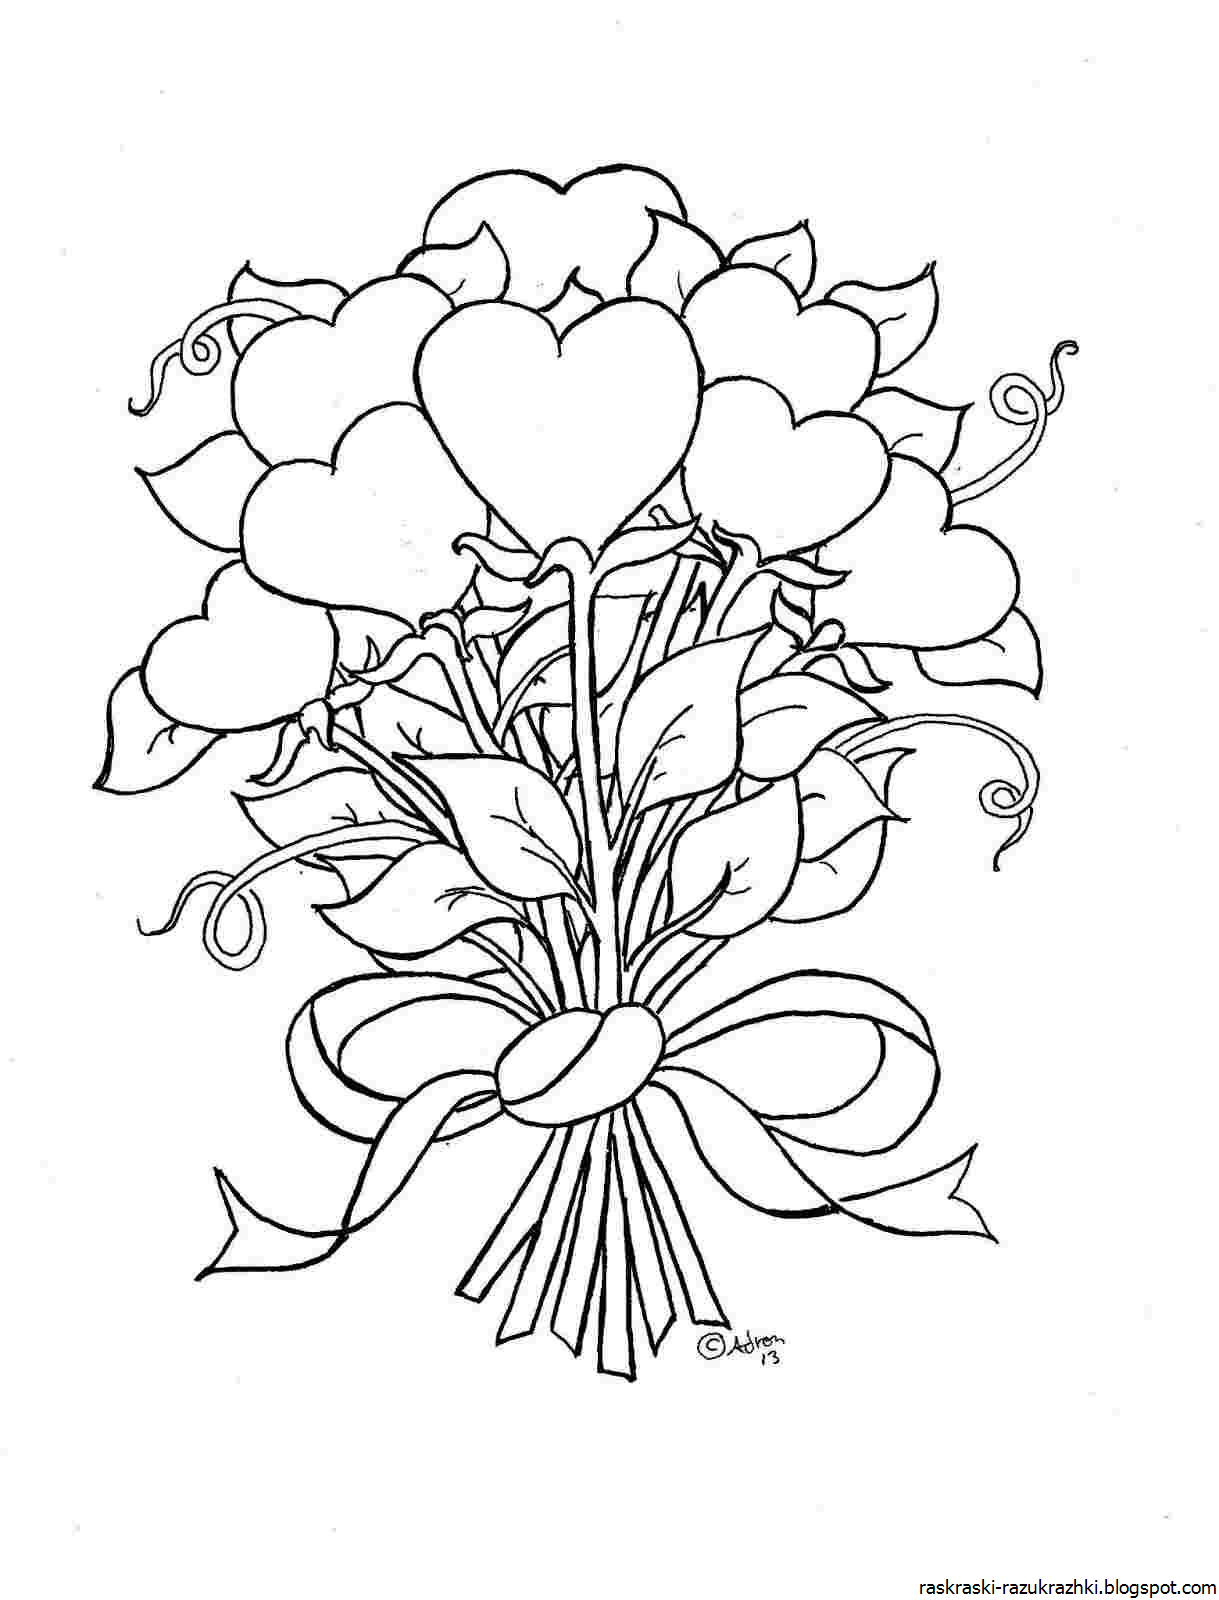 Superb bouquet coloring book for beginners